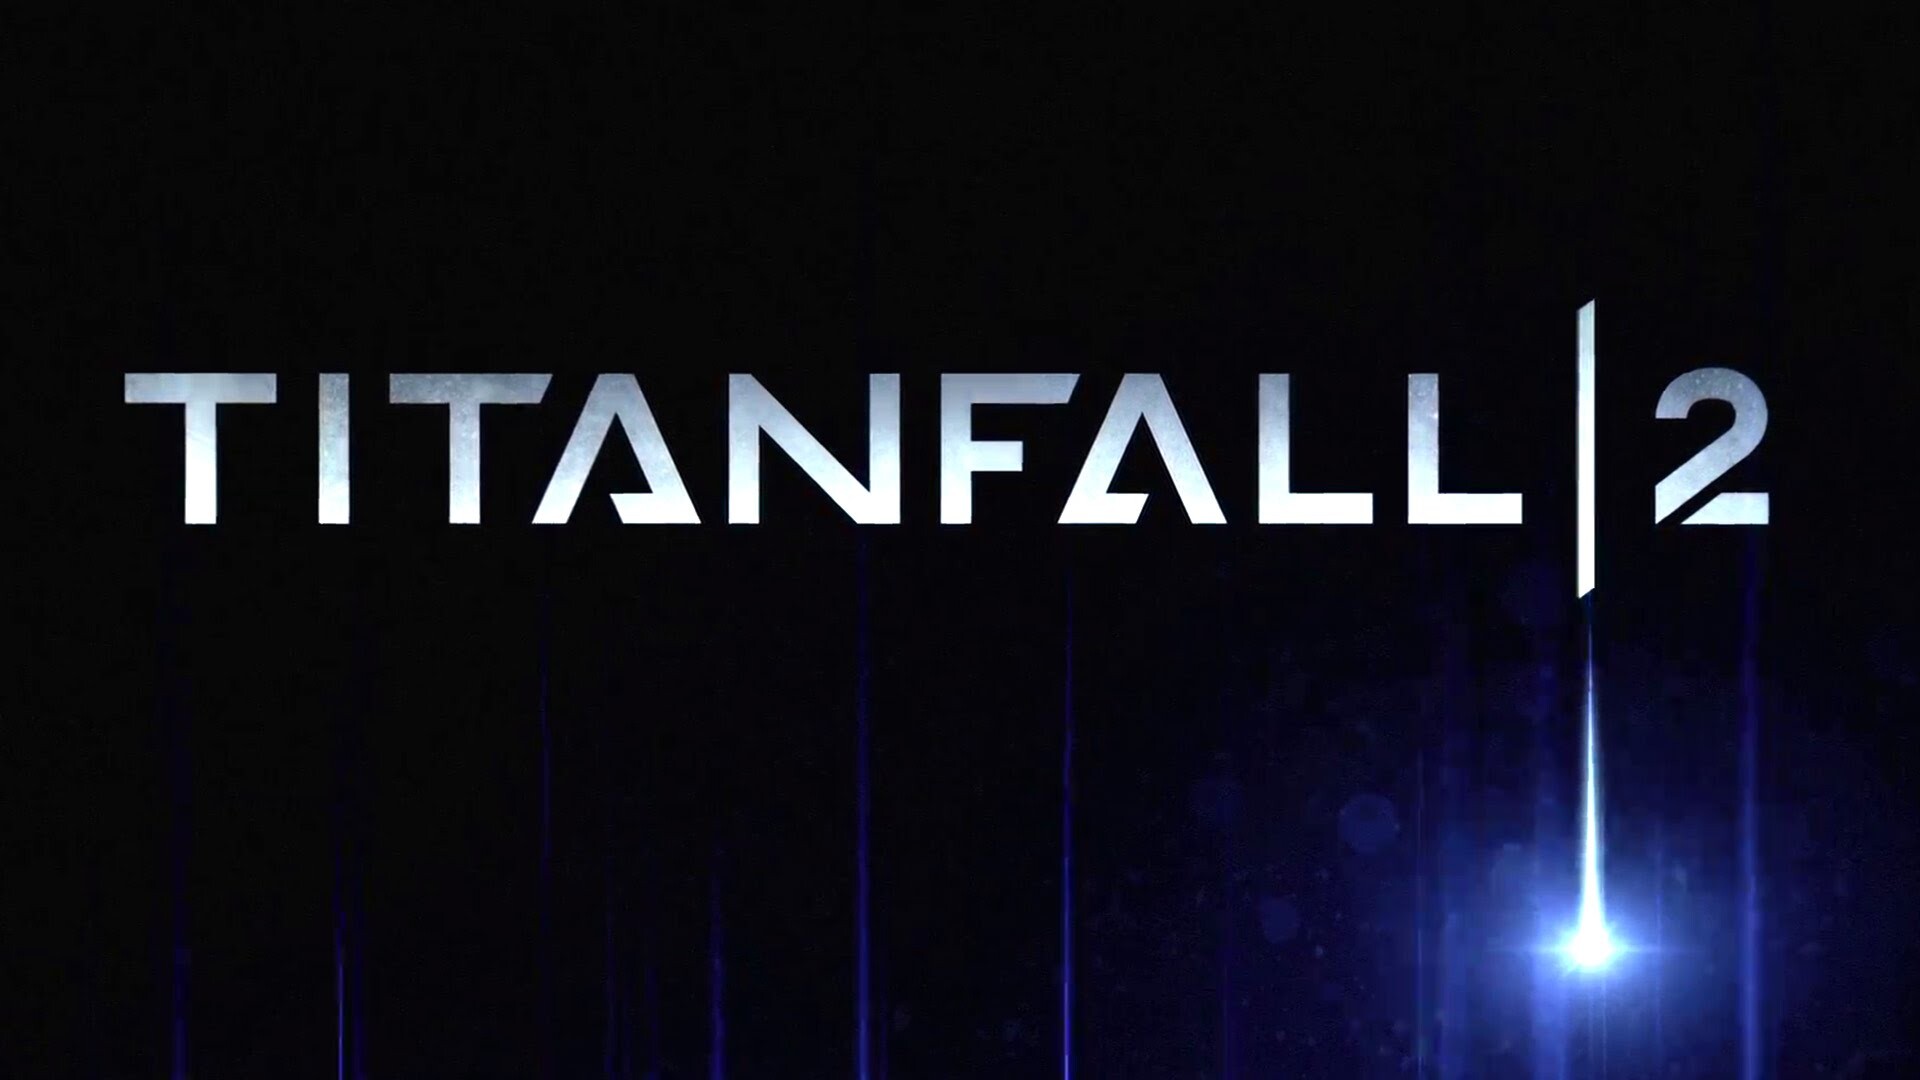 Titanfall 2 Information Leaked Ahead Of E3 Conference